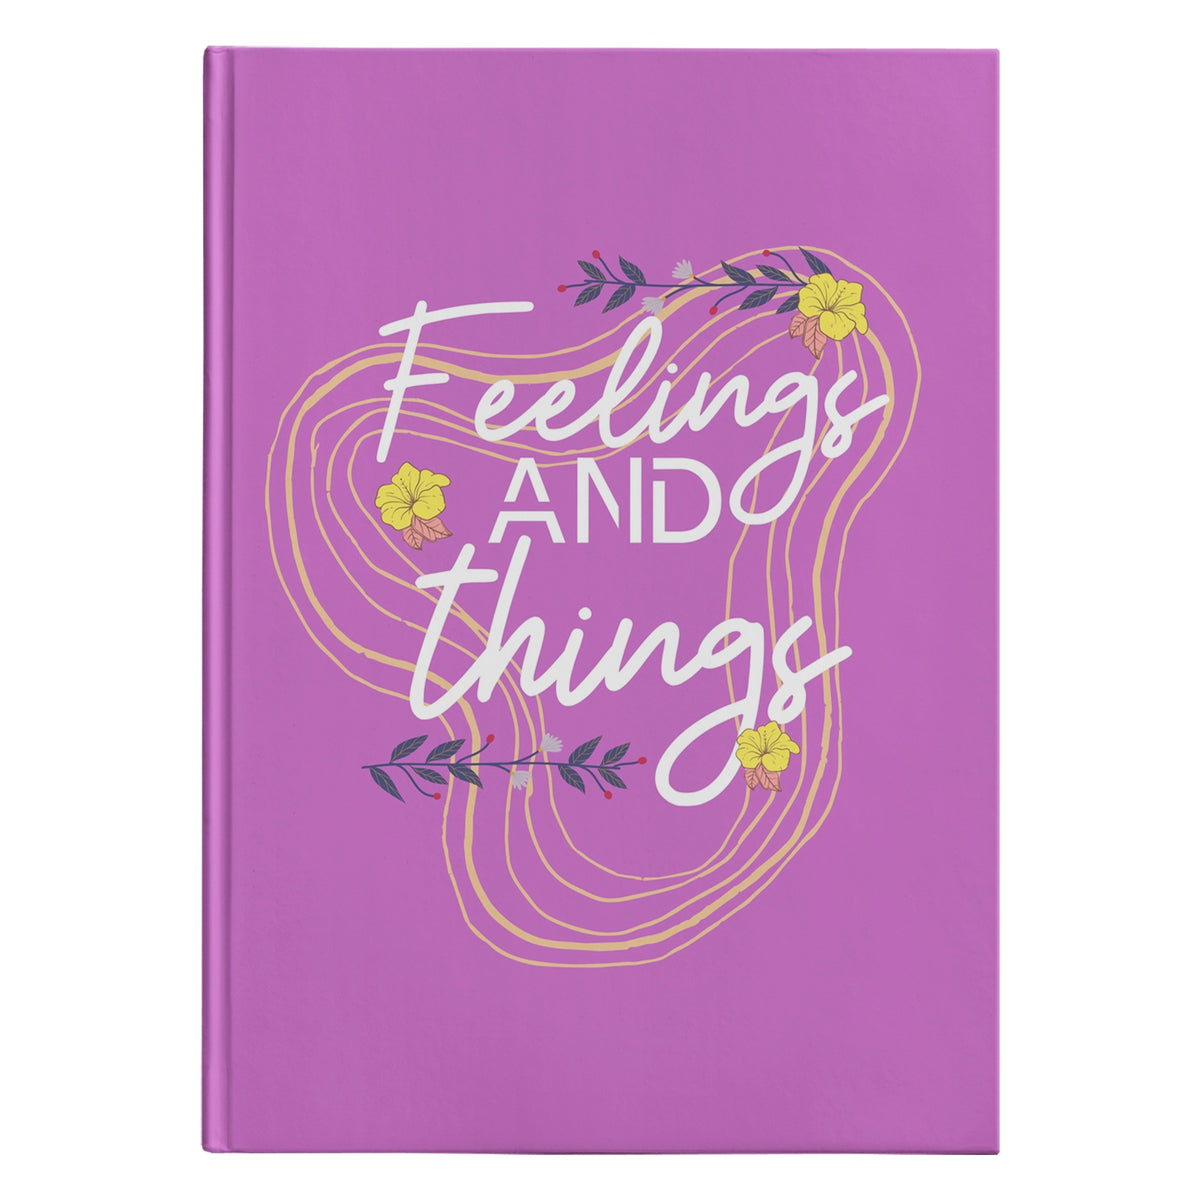 Fellings And Things Journal Hardcover - The Unchargeables